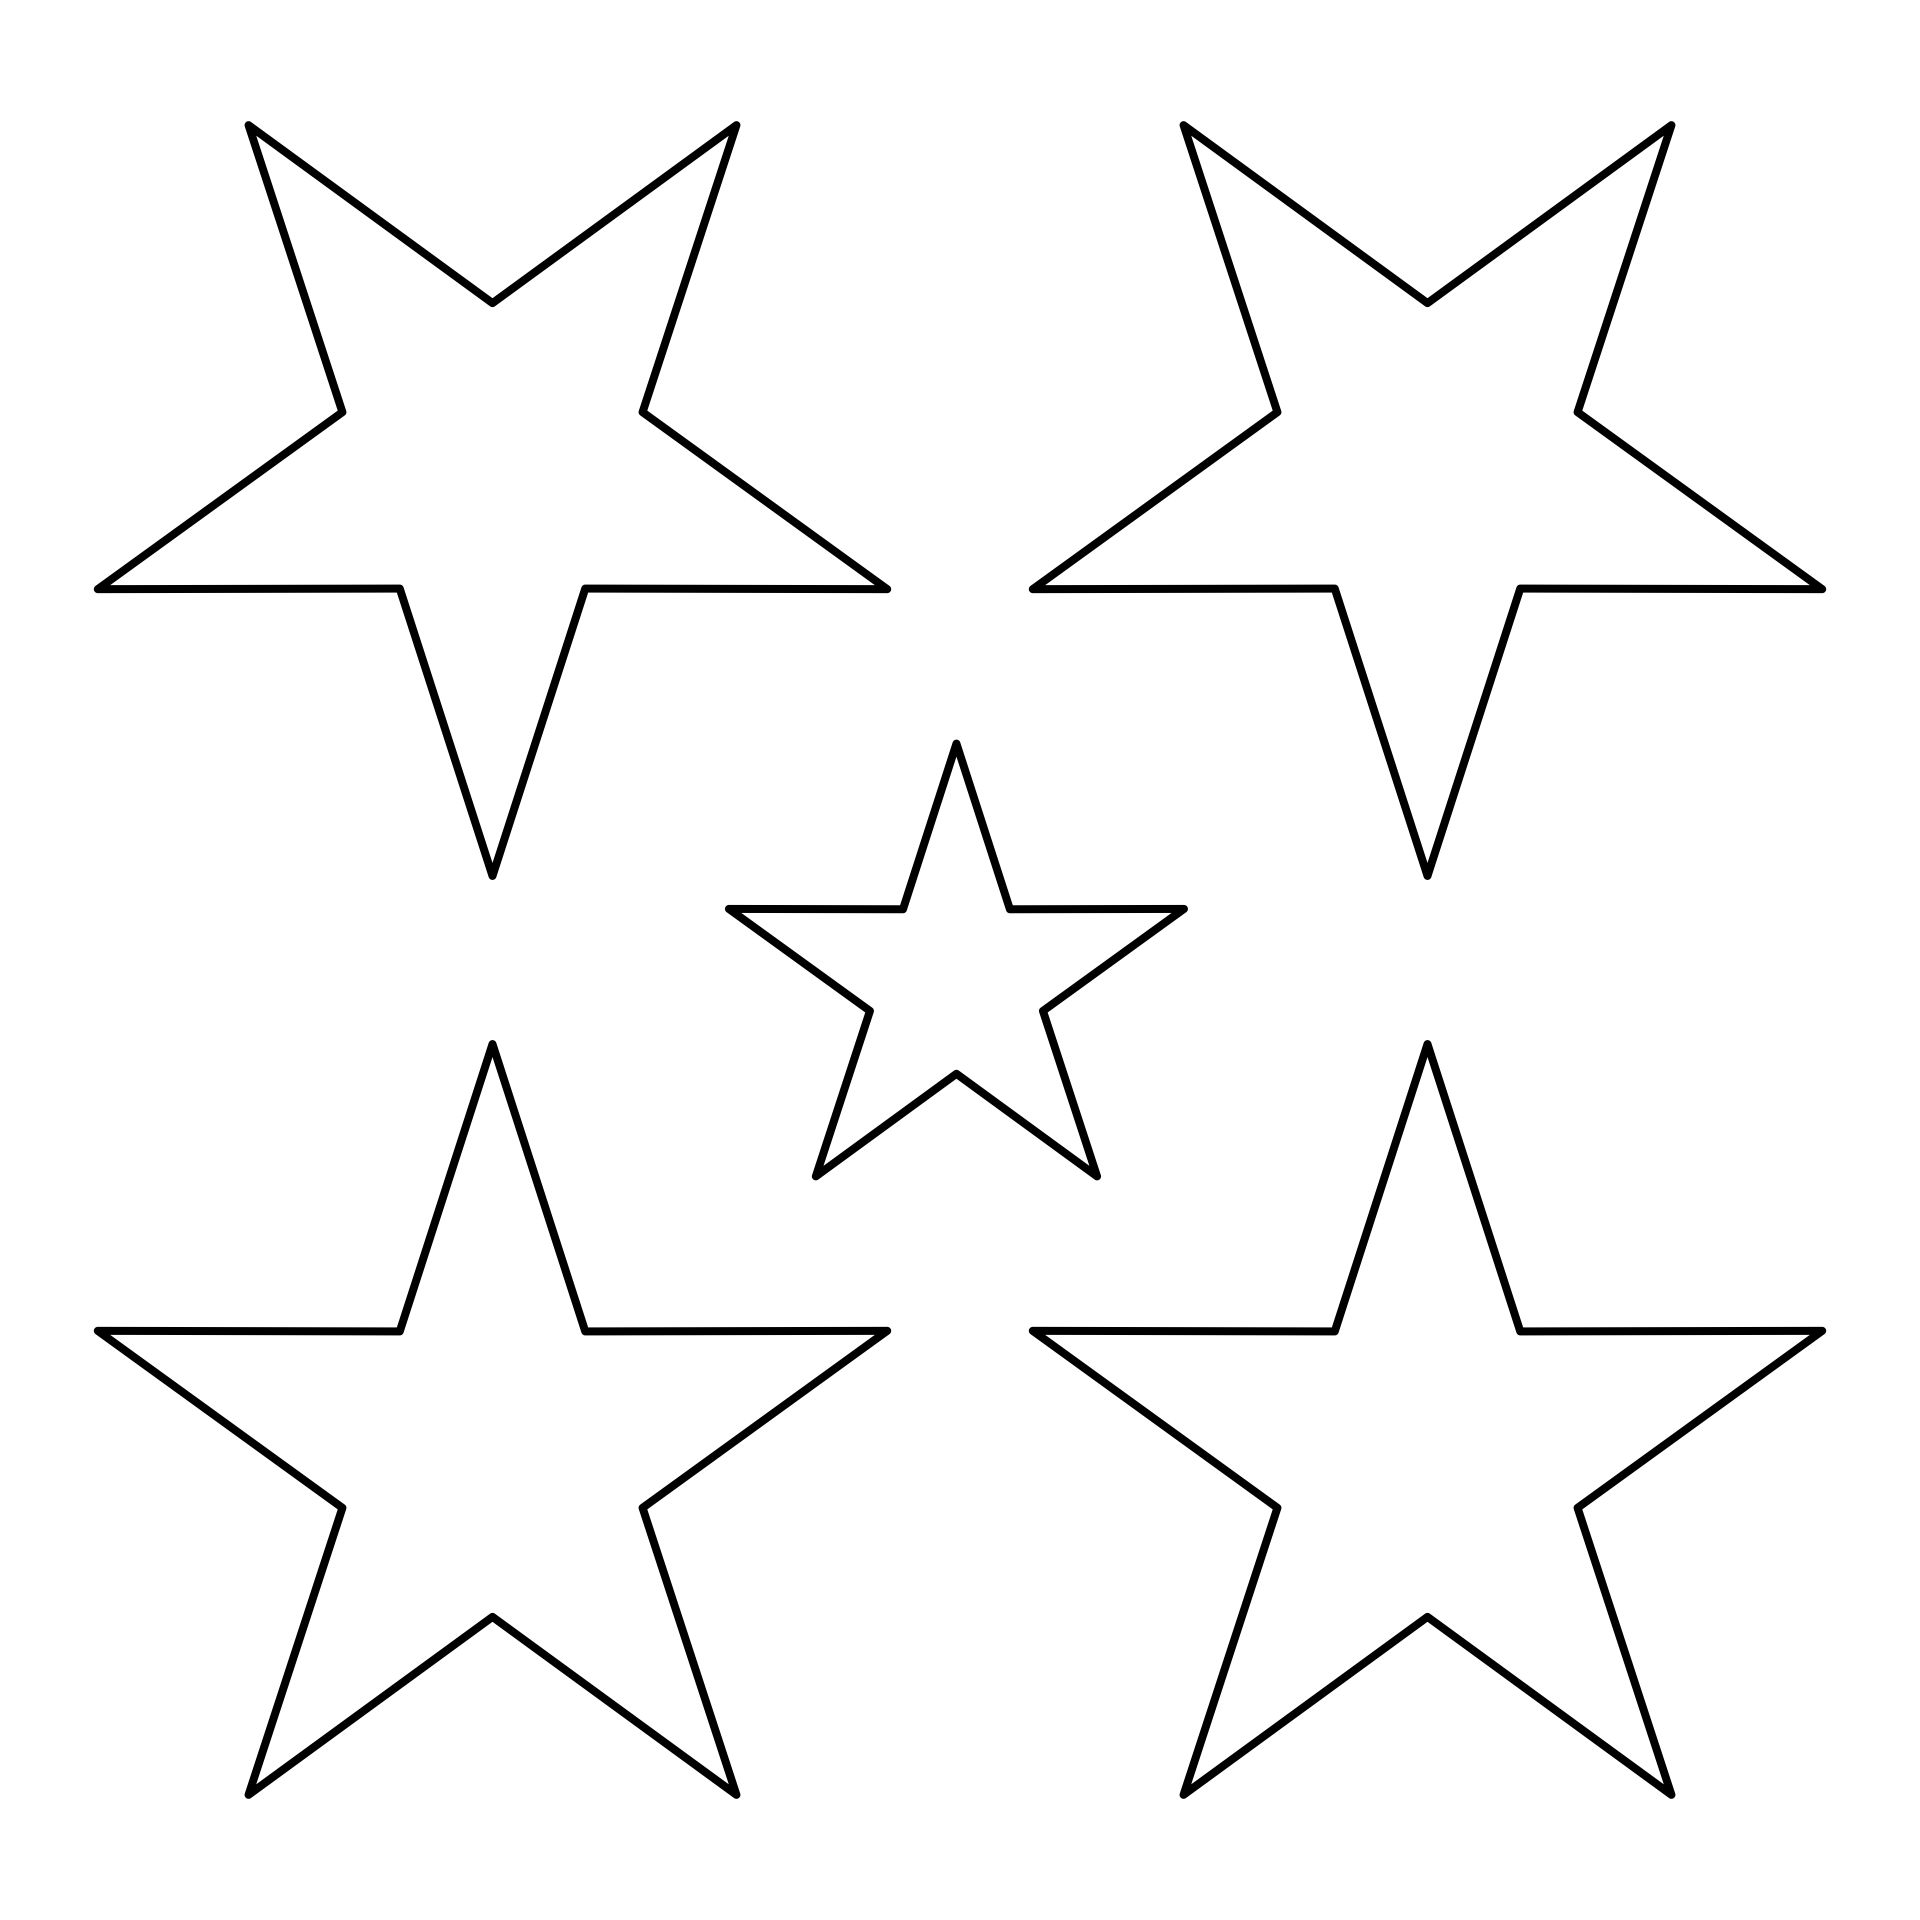 6 Best Images of Printable Cut Out Star Shape Free Printable Star